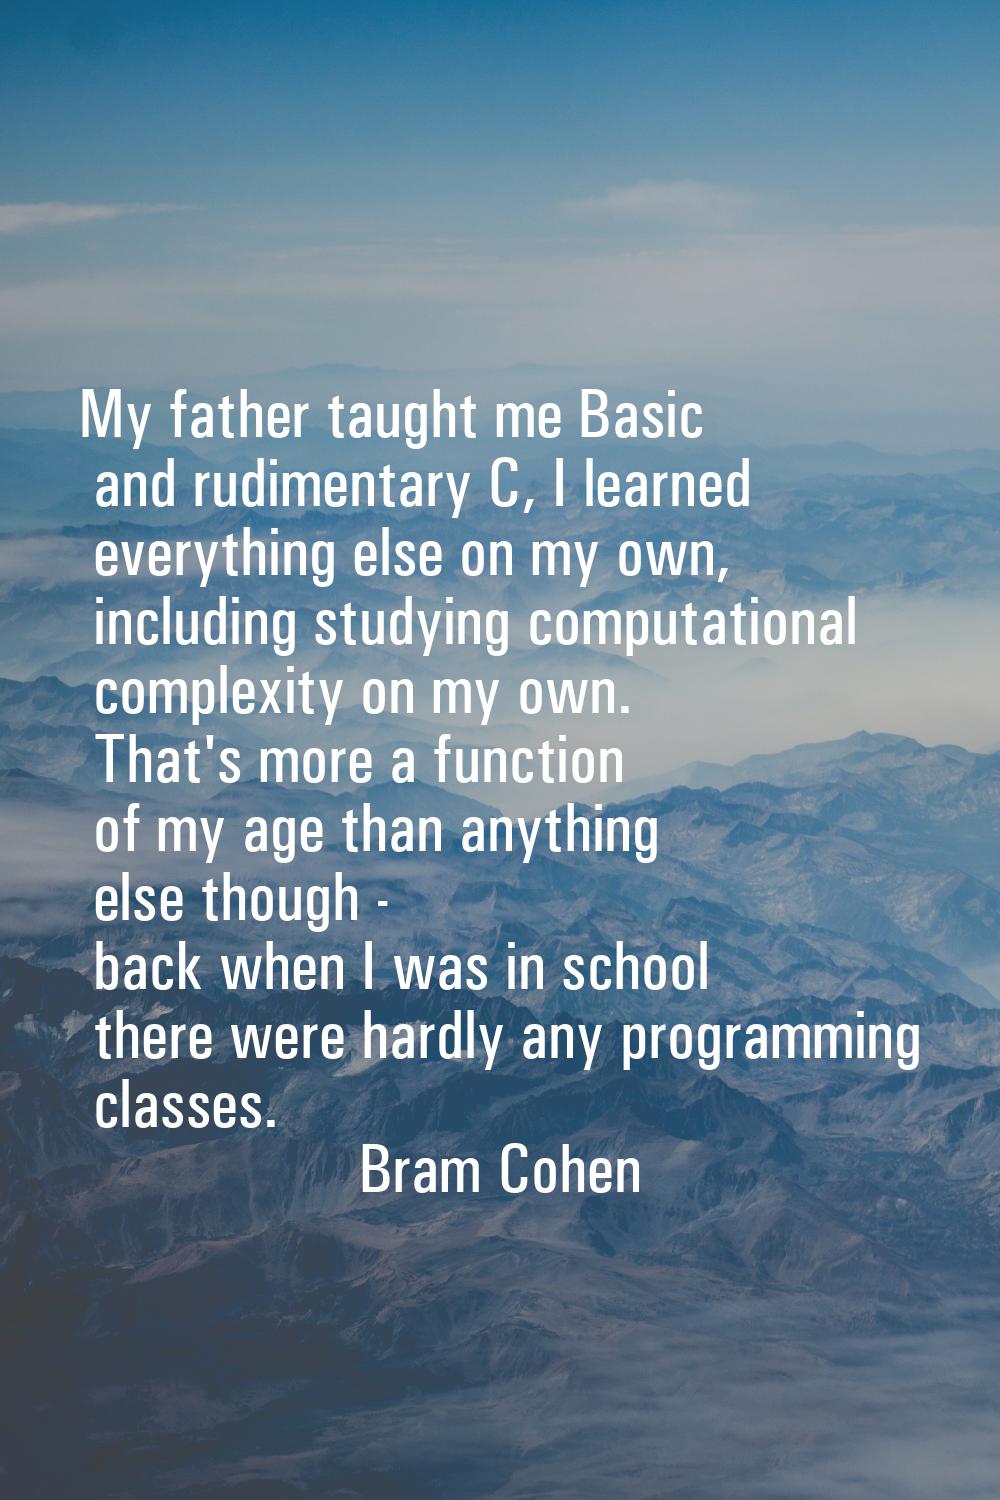 My father taught me Basic and rudimentary C, I learned everything else on my own, including studyin